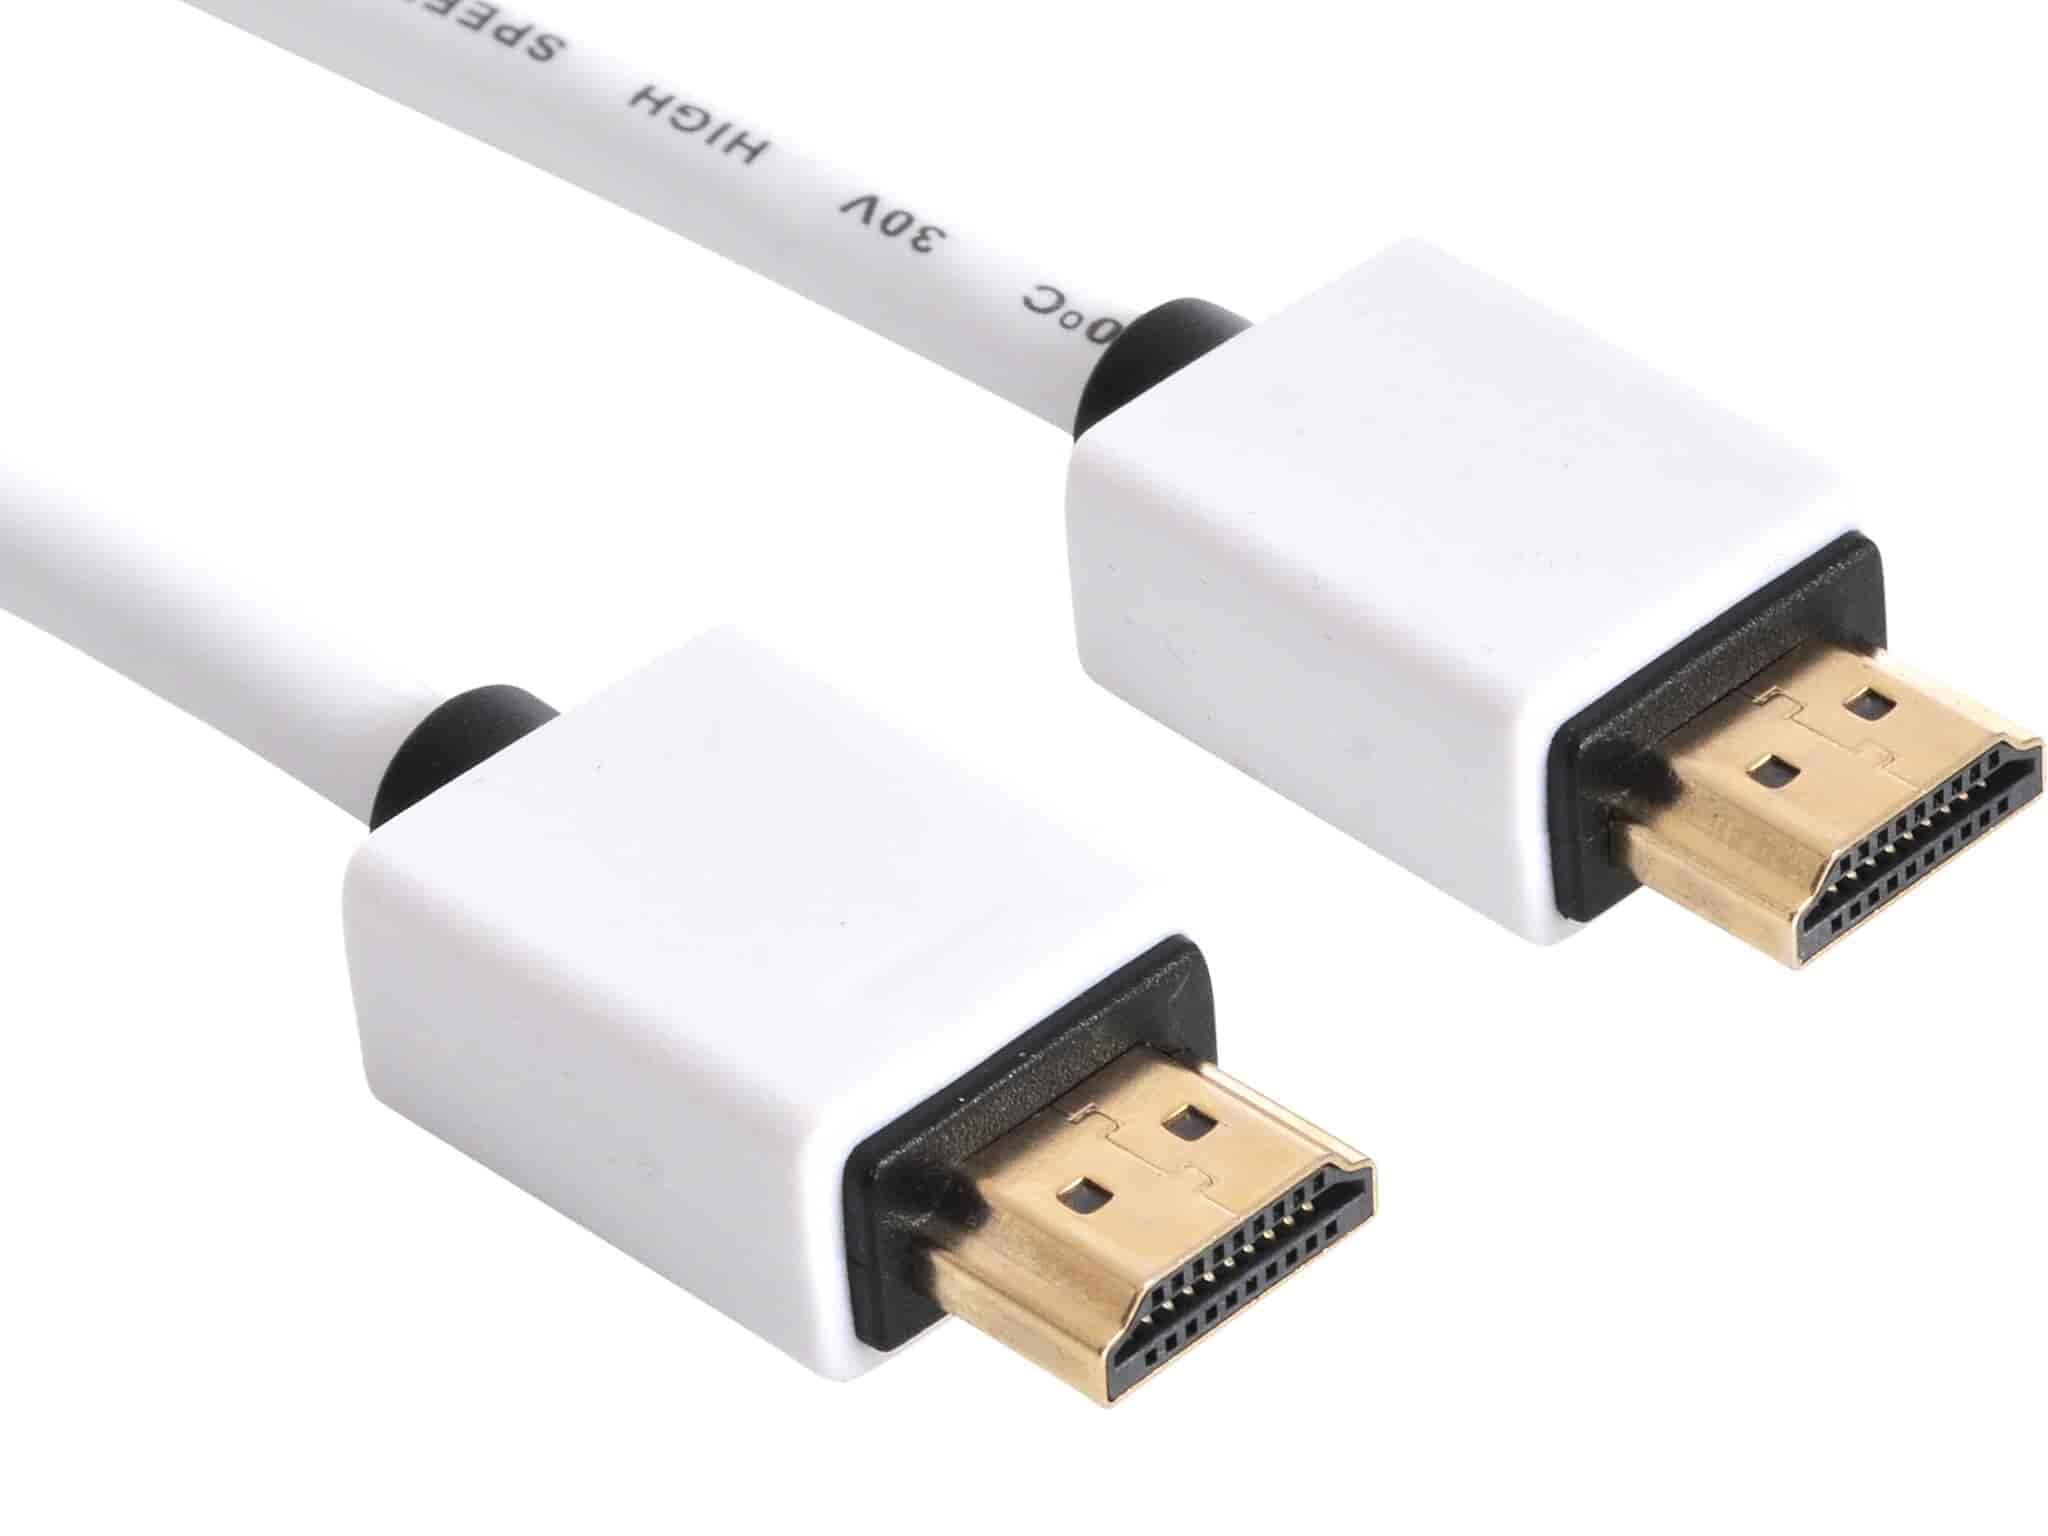 Sandberg HDMI 2.0, 2m SAVERYou can use this cable to connect HDMI devices like your DVD player or games console to your TV with an HDMI connector.Sandberg